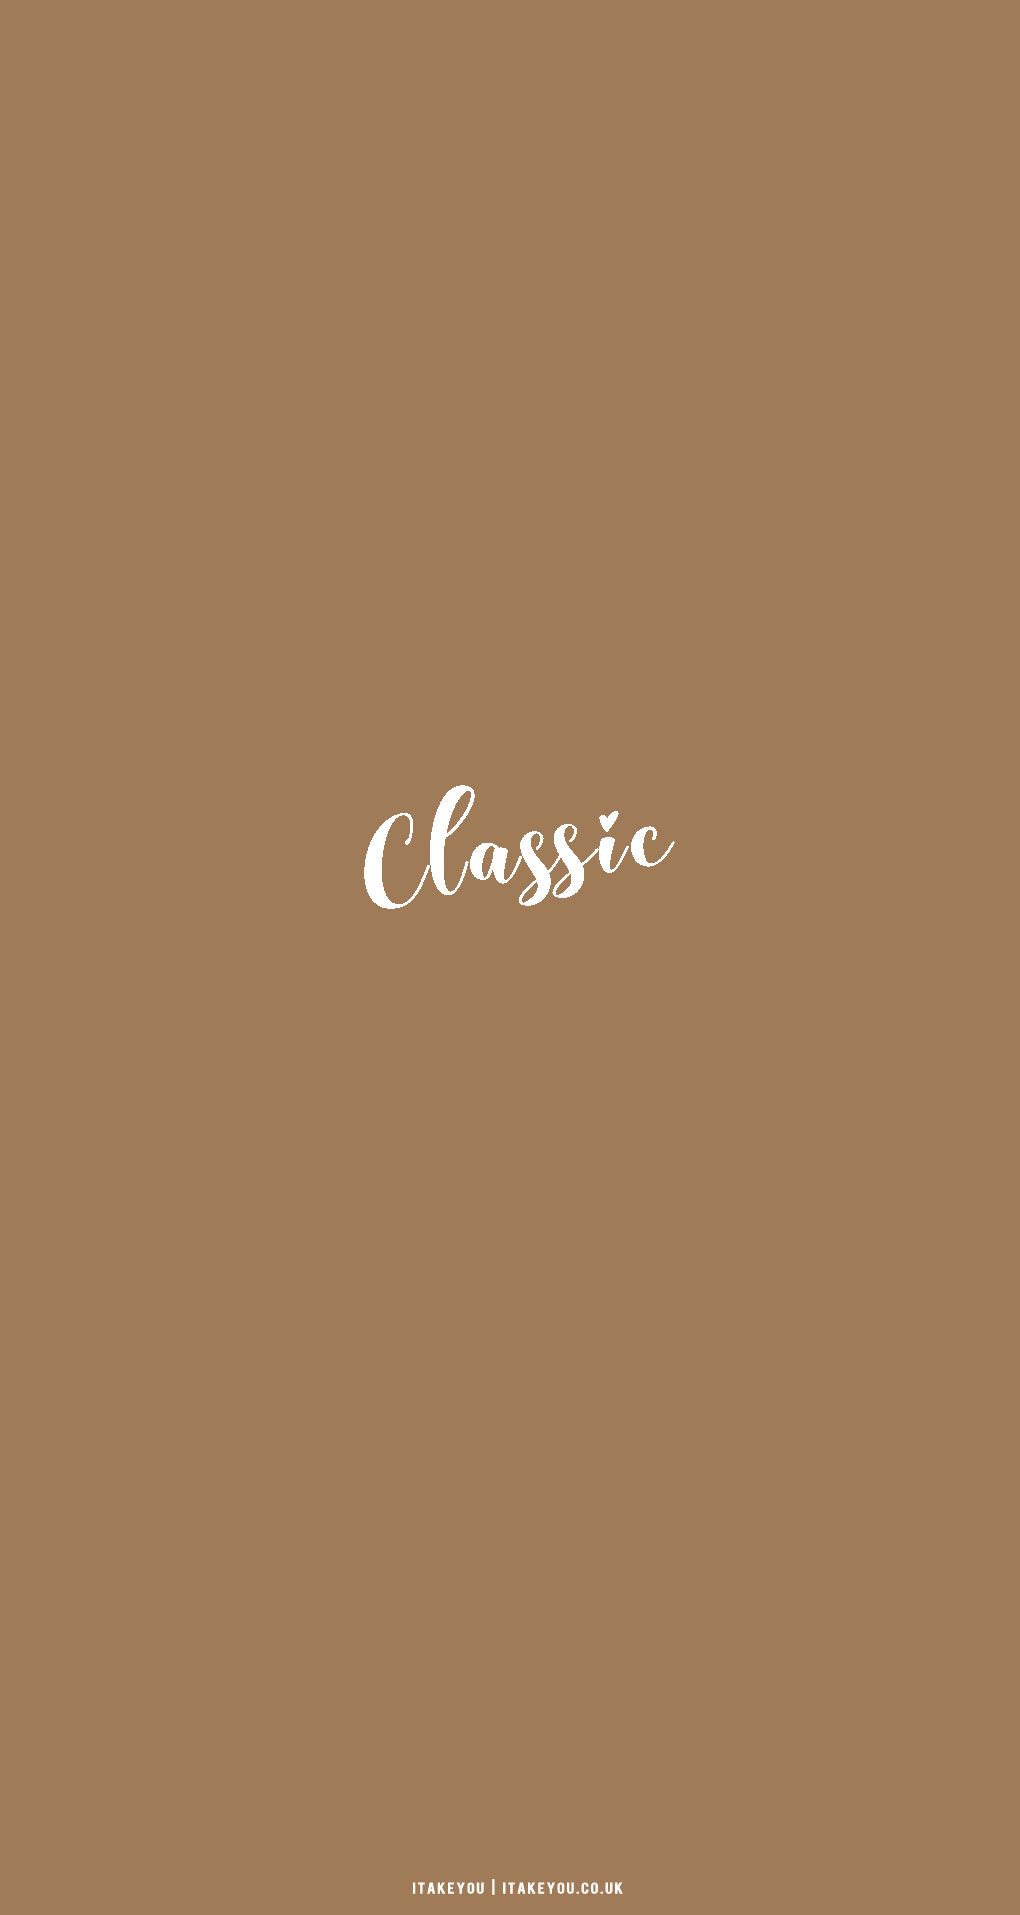 Cute Brown Aesthetic Wallpaper for Phone : Classic Brown Wallpaper I Take You. Wedding Readings. Wedding Ideas